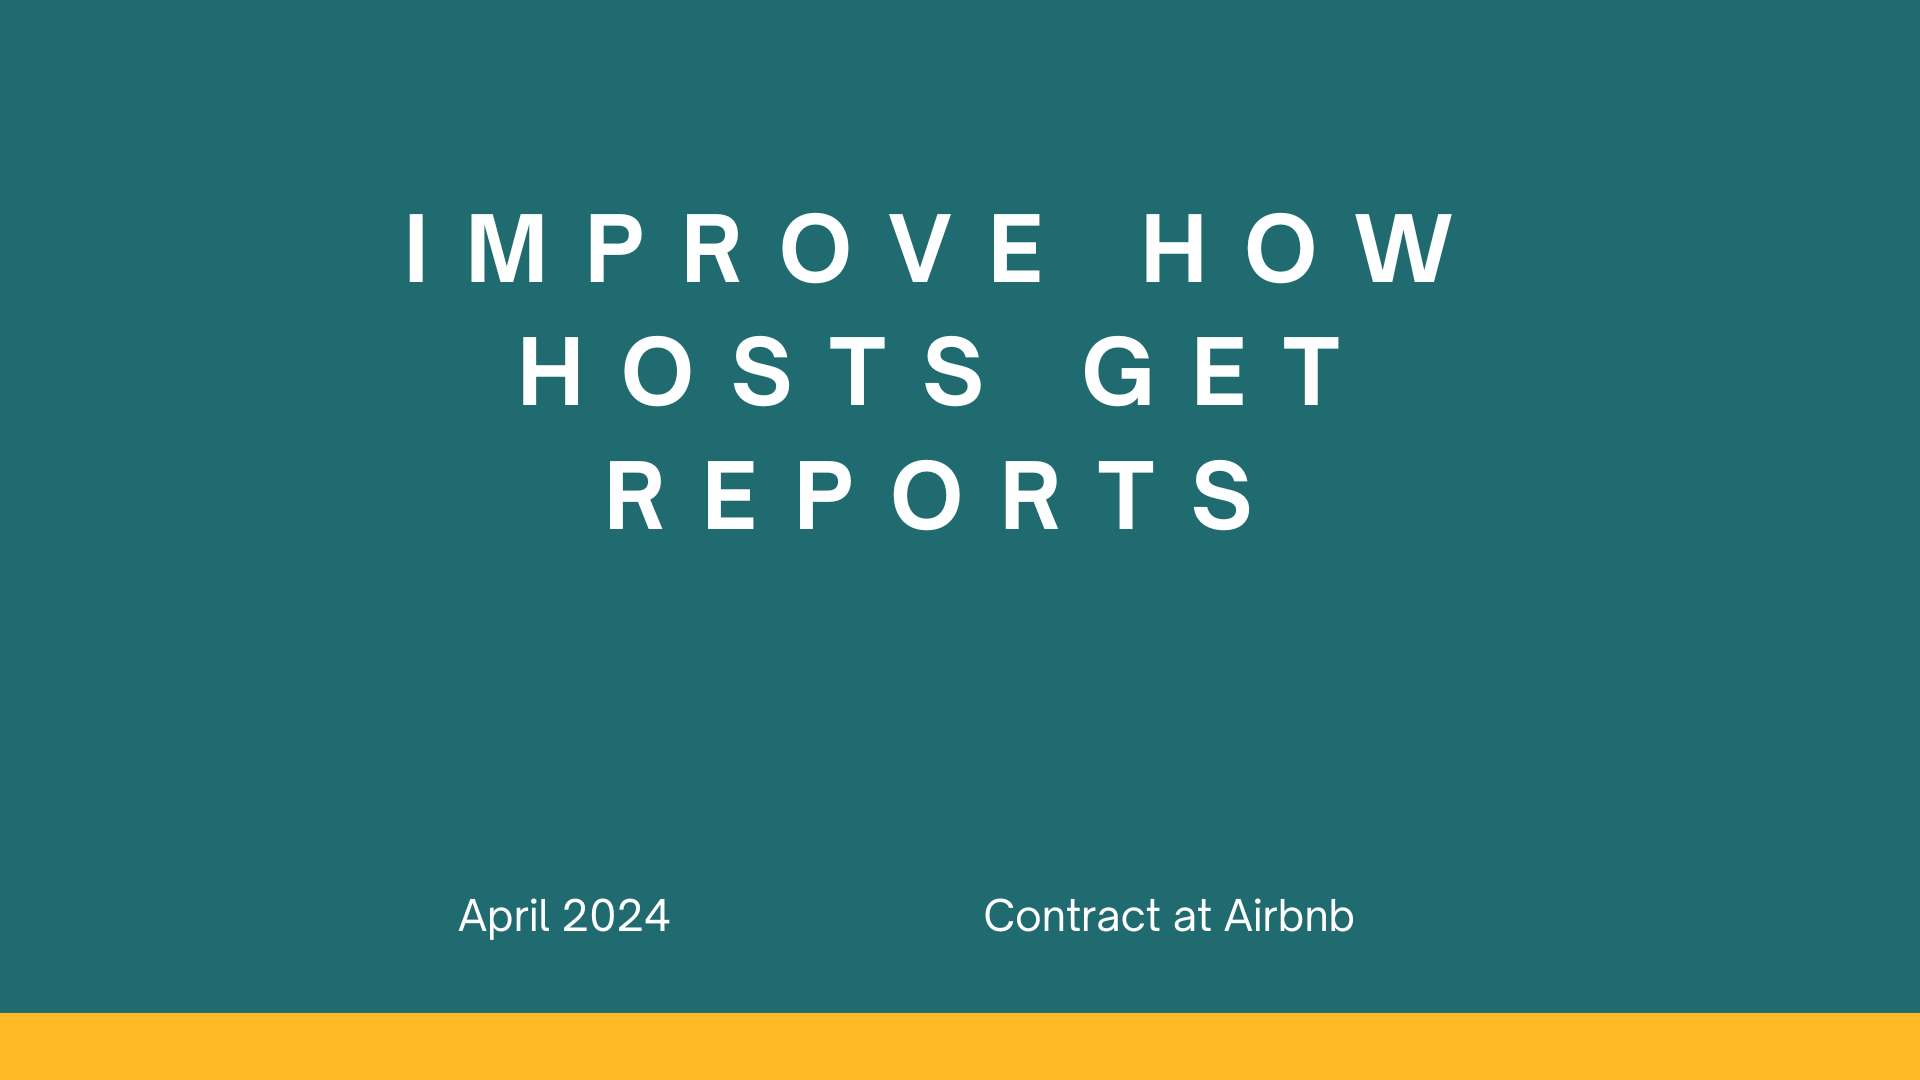 Protected: Improve how hosts get reports